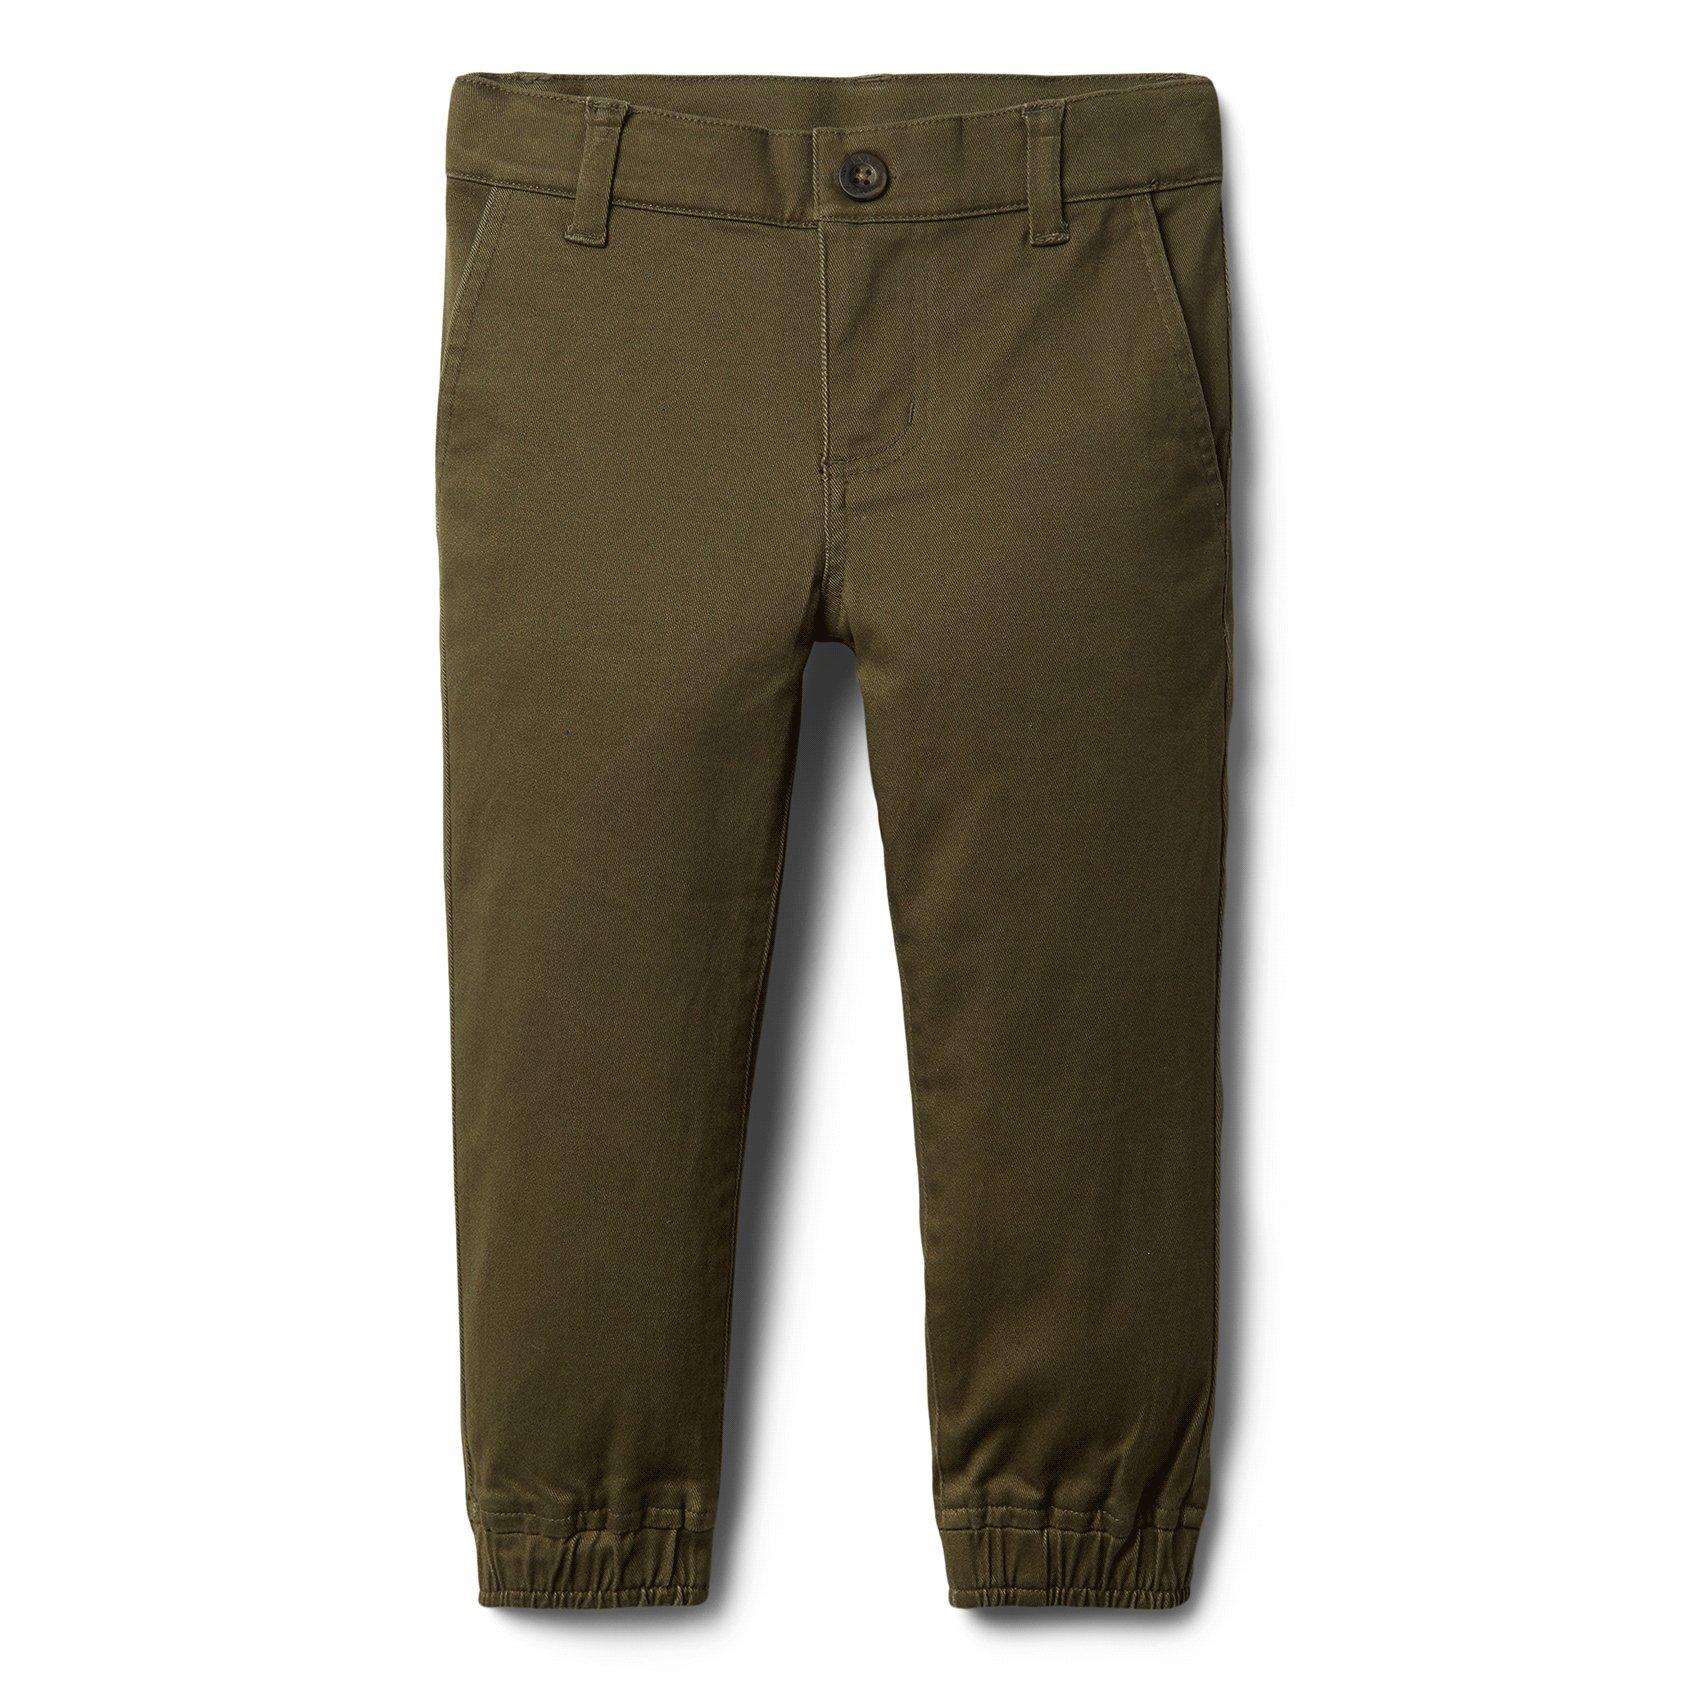 The Twill Jogger 